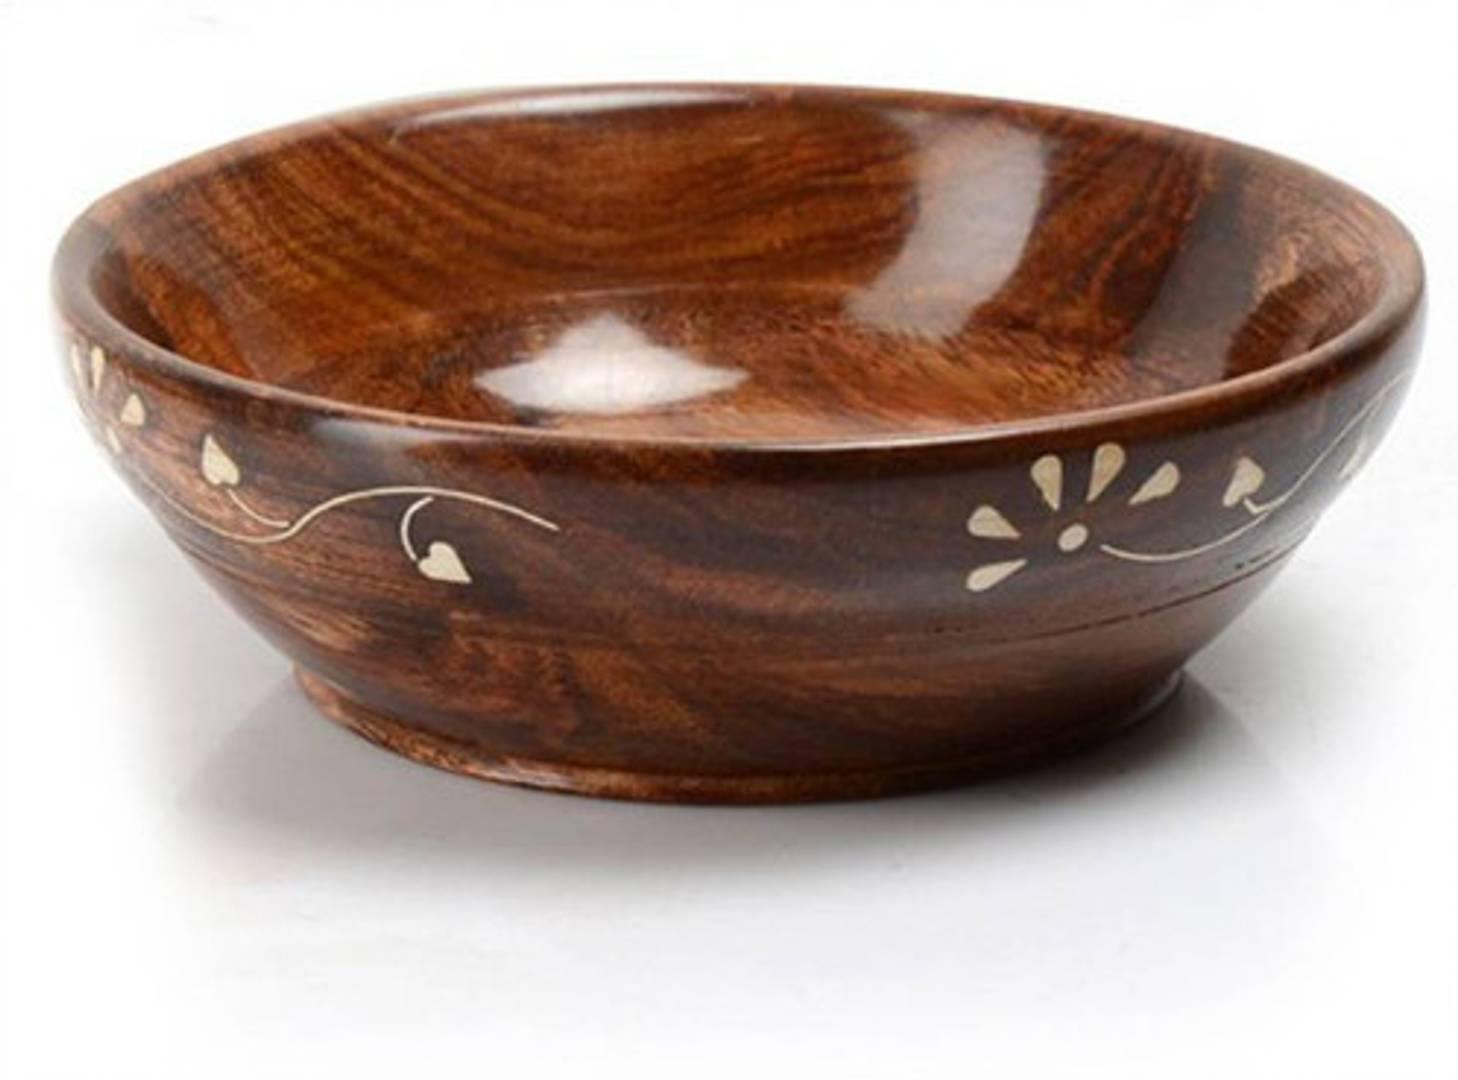 Wooden Snacks Bowls For Dry Snacks Or Fruits Decorative Set of 3 - Earth Thanks - Wooden Snacks Bowls For Dry Snacks Or Fruits Decorative Set of 3 - natural, vegan, eco-friendly, organic, sustainable, compostable, dinnerware, food storage, home, house, kitchen, non toxic, recyclable, recycle, recycle friendly, reusable, save food, tableware, vegan friendly, wood, wooden